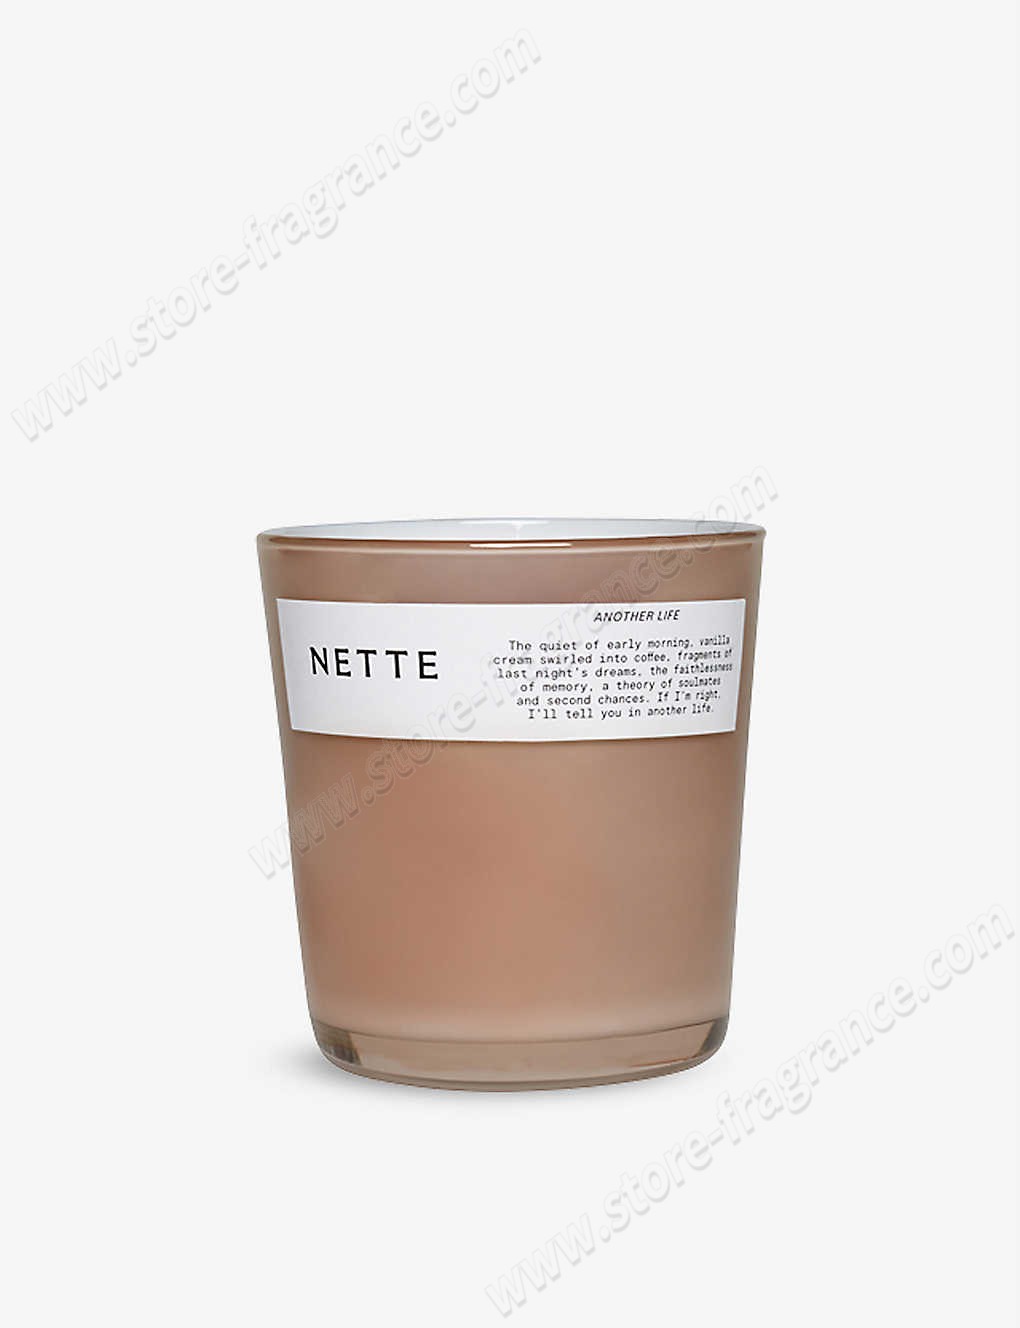 NETTE/Another Life scented candle 20.6oz ✿ Discount Store - -0